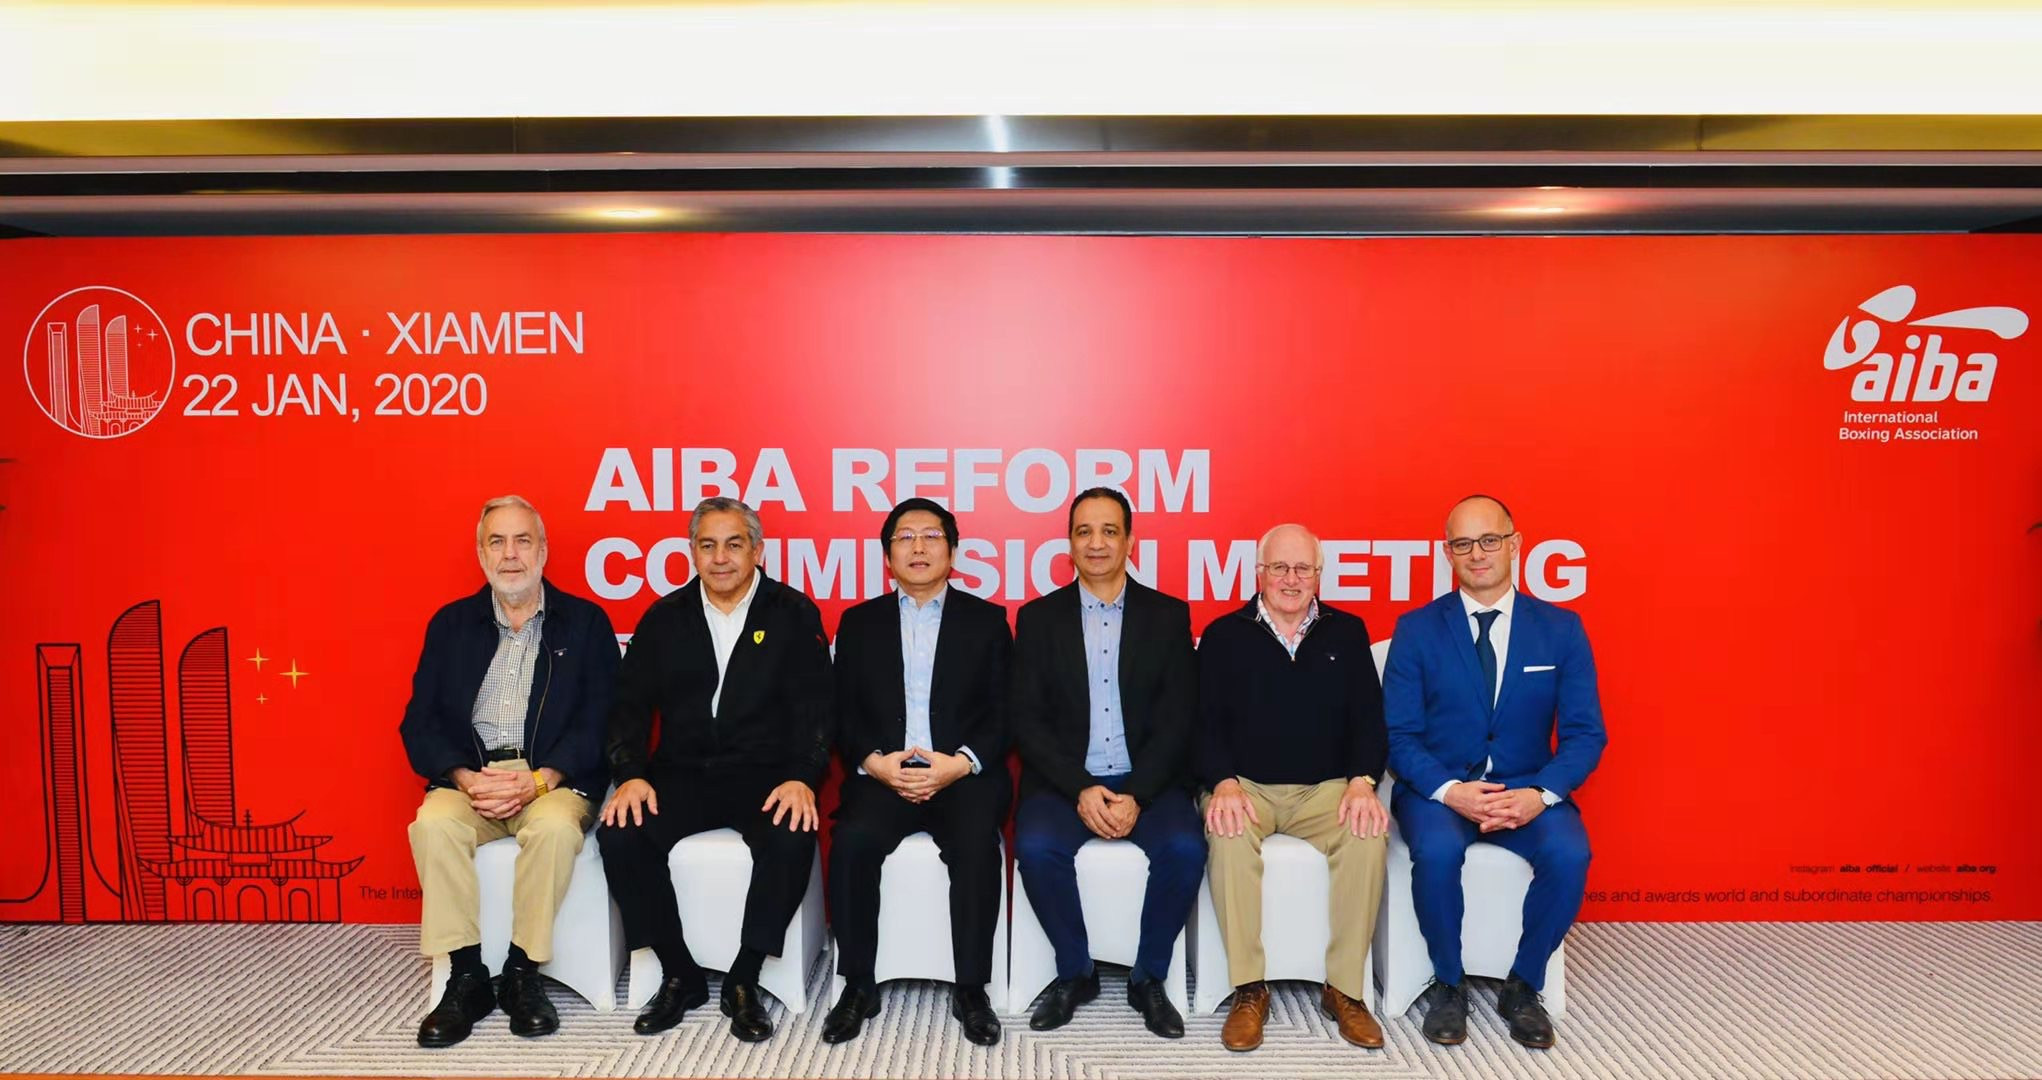 The AIBA Reform Commission,led by China's Wu Di, third left, will present its proposals to the Executive Committee meeting tomorrow ©AIBA